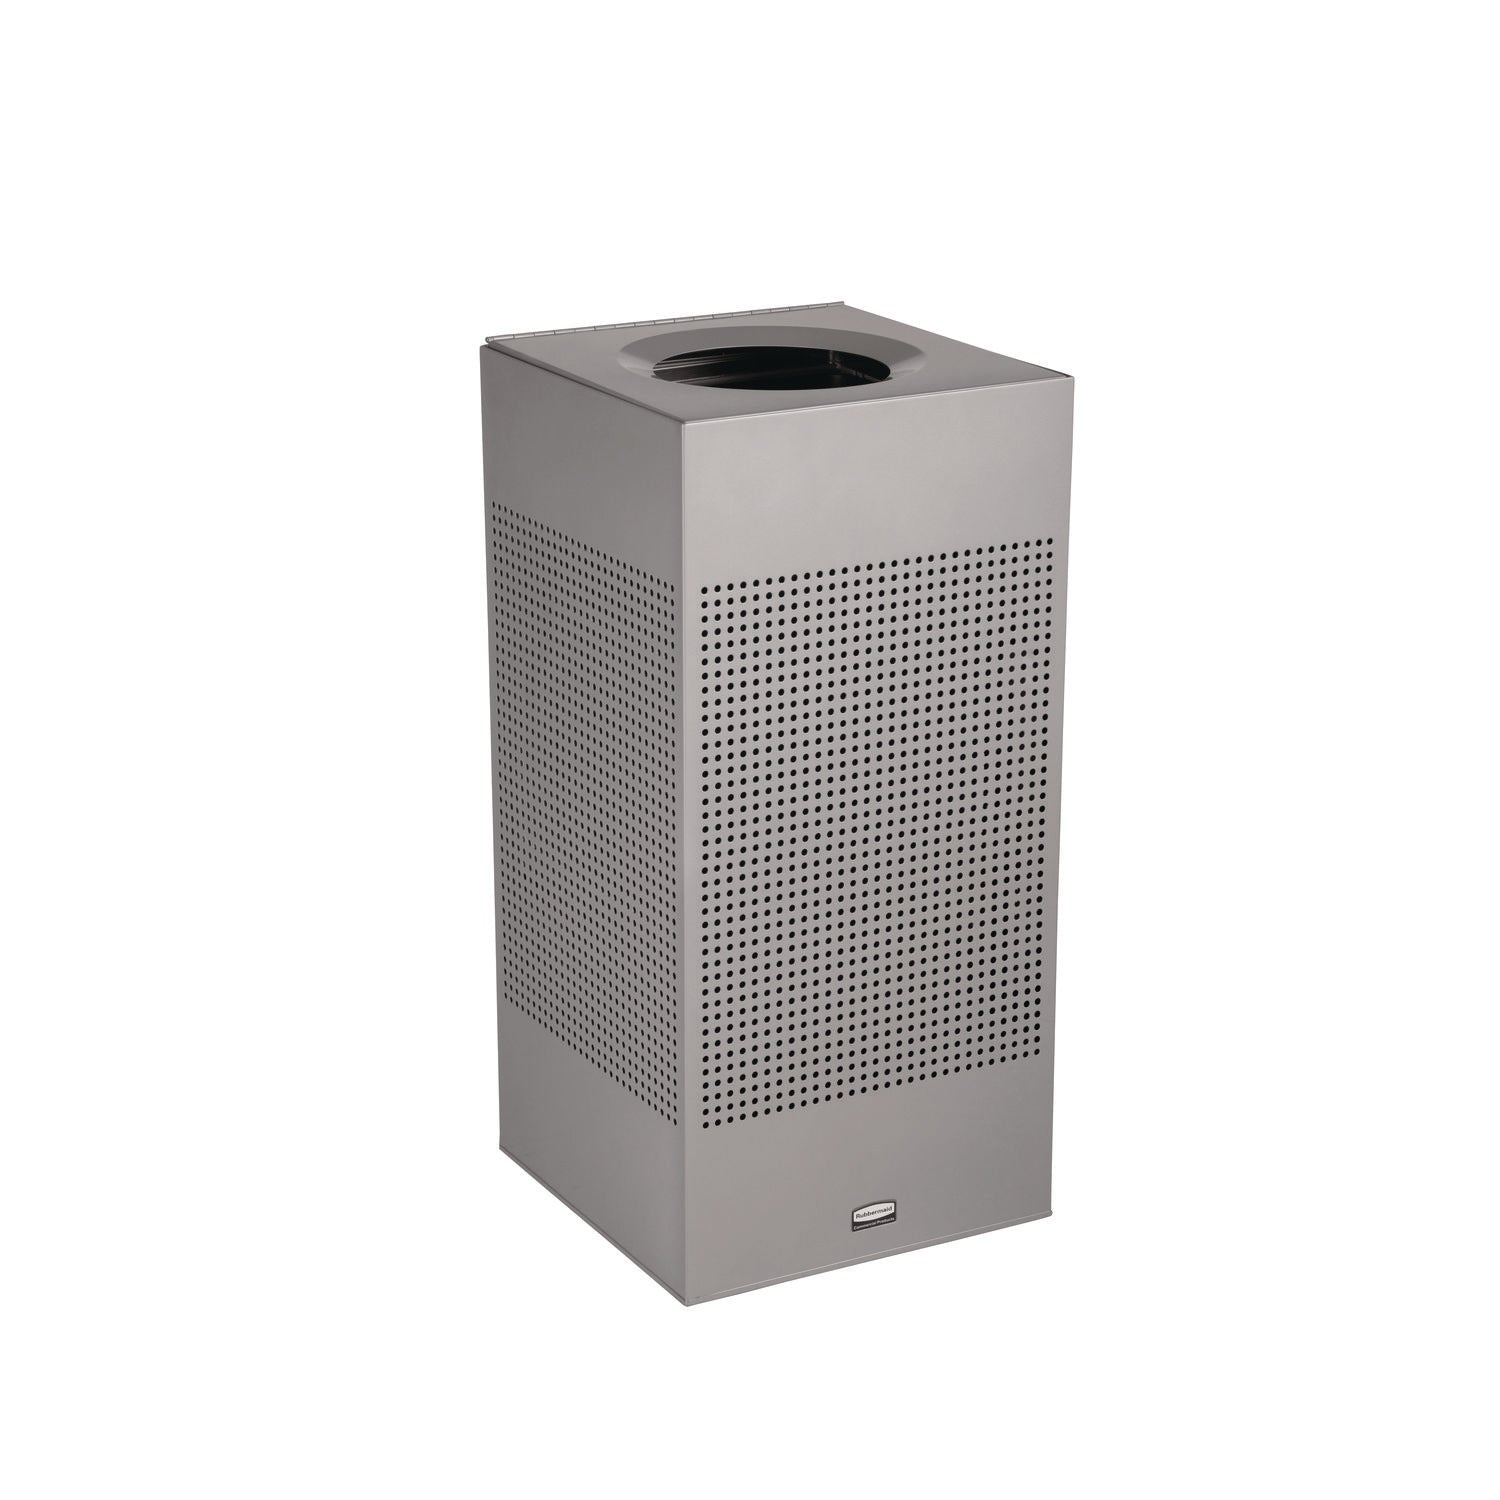 Rubbermaid Commercial Silhouettes 16G Waste Container - 16 gal Capacity - Square - Perforated, Fire-Safe, Durable - 30.4" Height x 14.8" Width x 14.8" Depth - Steel, Metal - Silver Metallic - 1 Each - 2